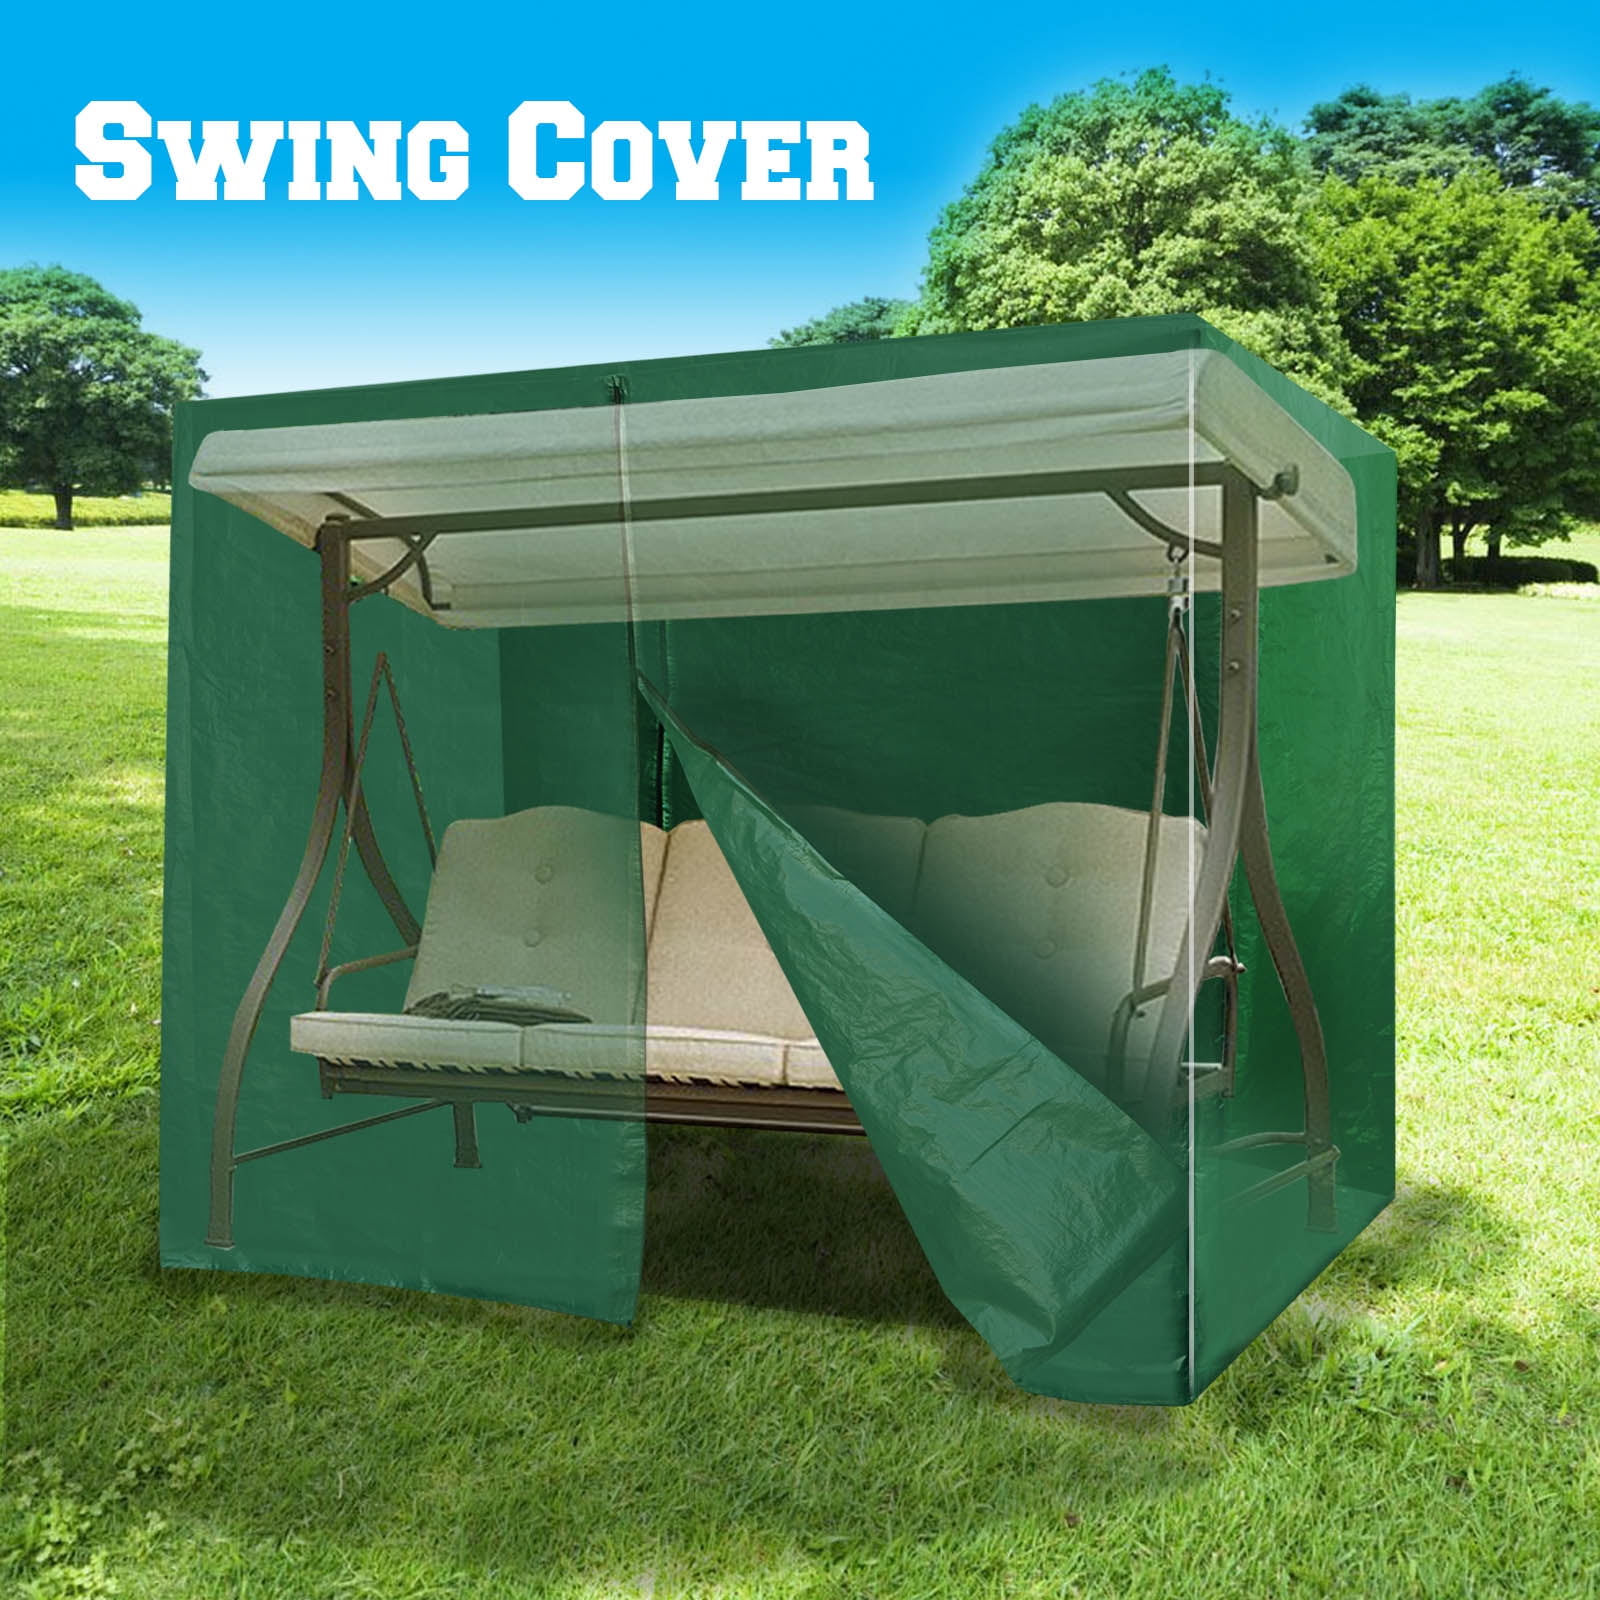 Sunrise Outdoor Patio 3 Seat Swing Cover Protector Furniture Cover Green